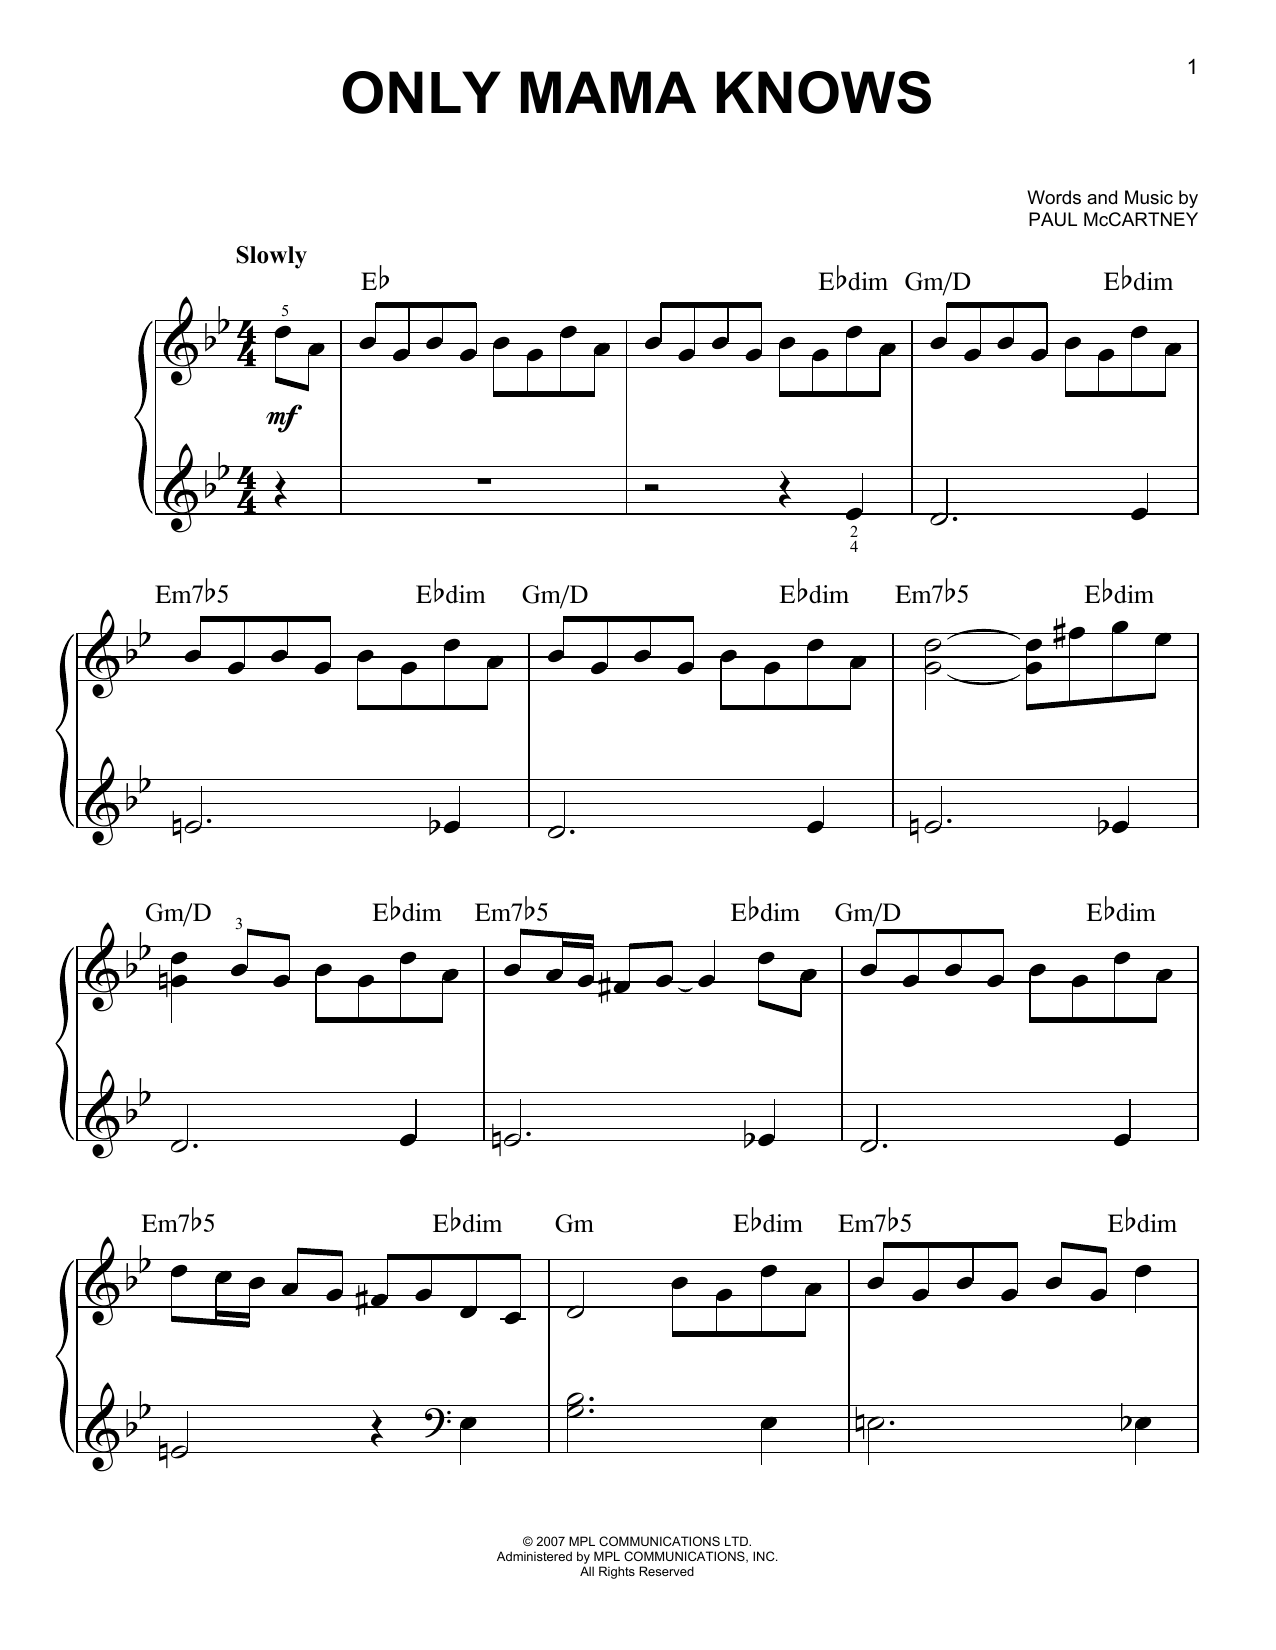 Download Paul McCartney Only Mama Knows Sheet Music